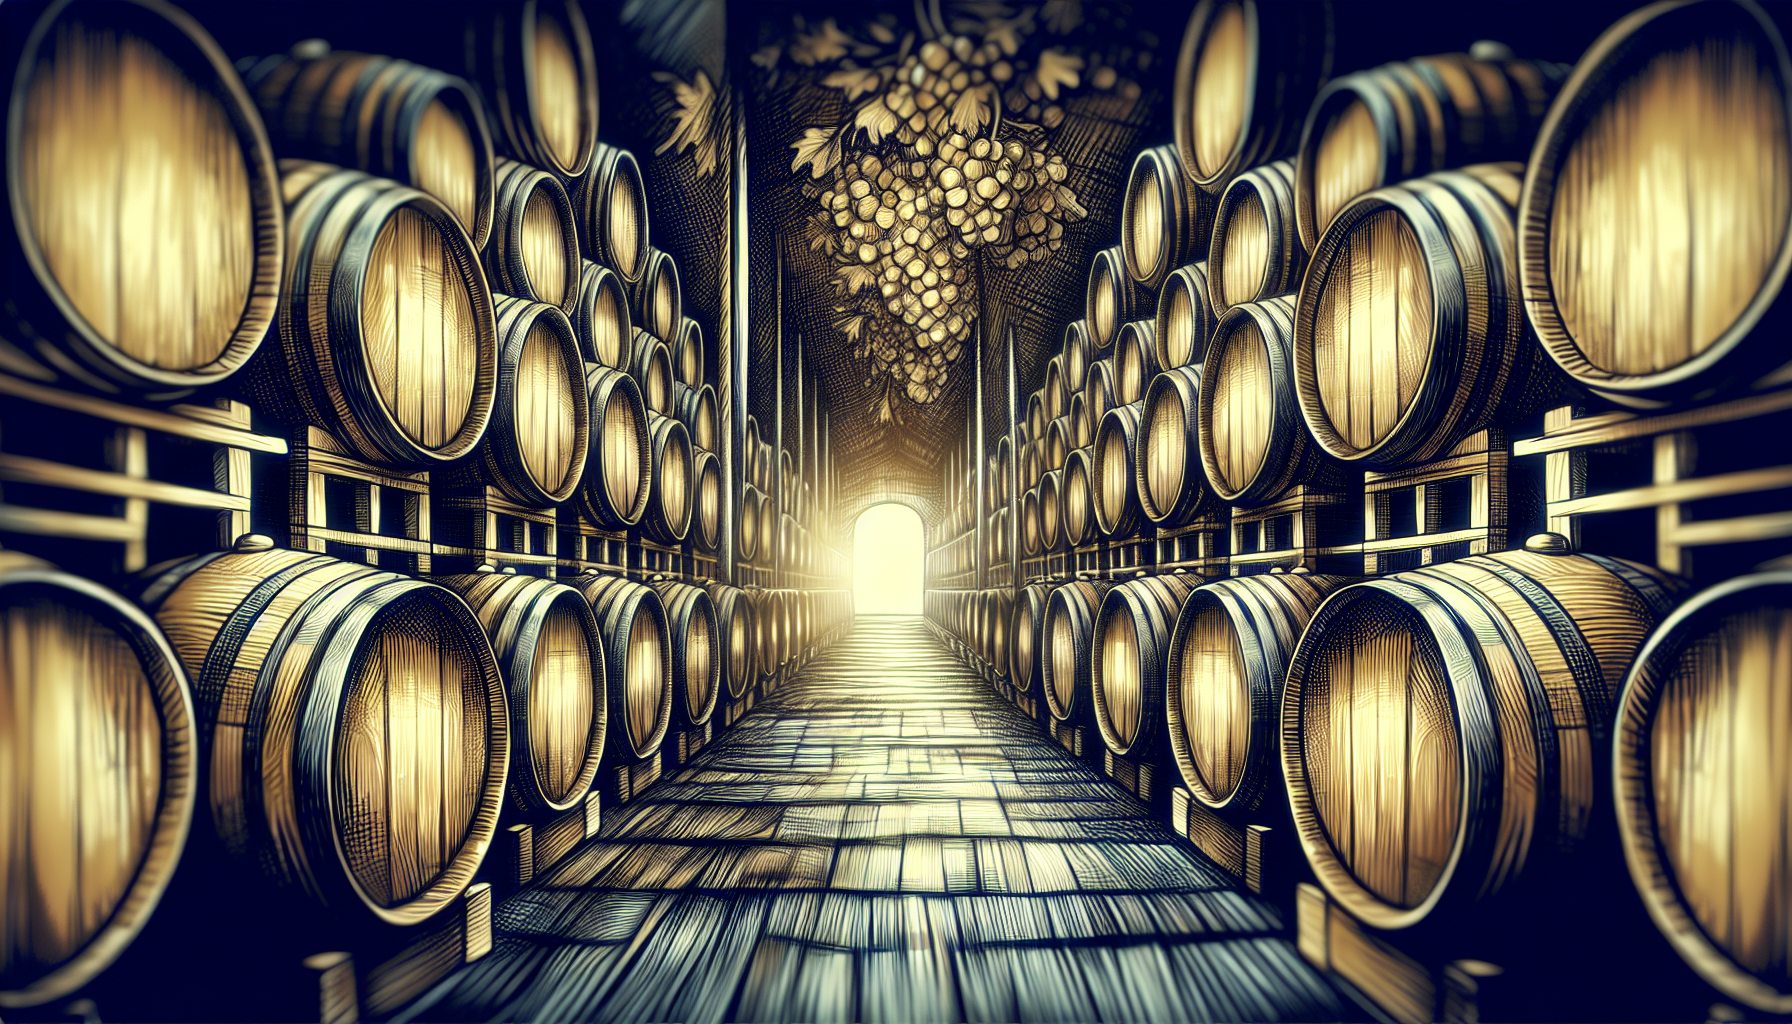 Illustration of oak barrels in a winery, symbolizing the role of oak in crafting delicious wines